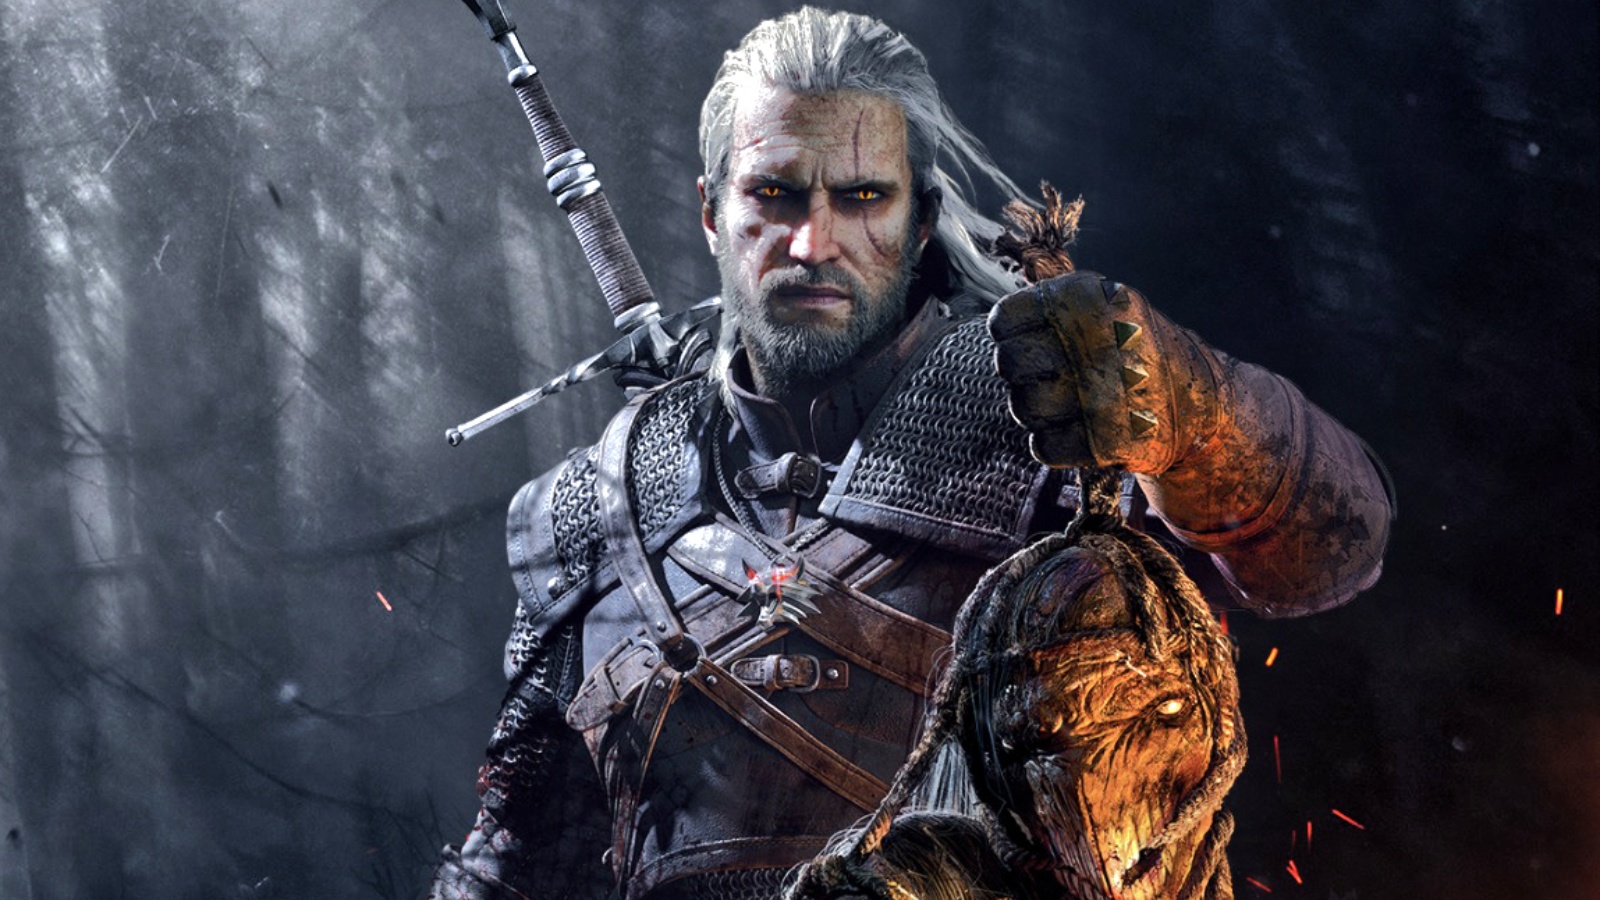 The Witcher 3 vagina controversy has been resolved